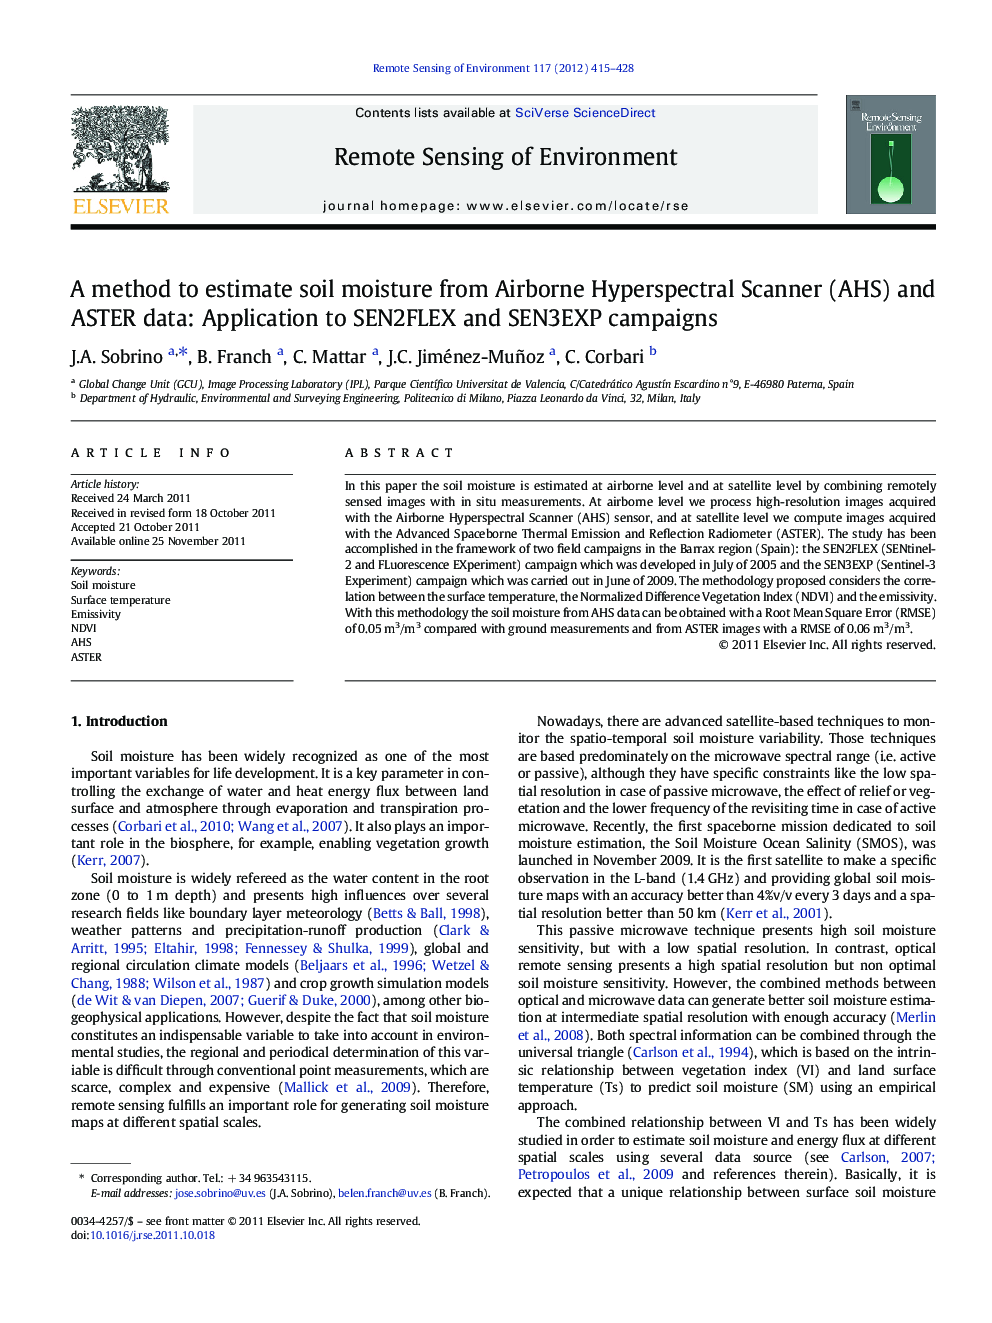 A method to estimate soil moisture from Airborne Hyperspectral Scanner (AHS) and ASTER data: Application to SEN2FLEX and SEN3EXP campaigns